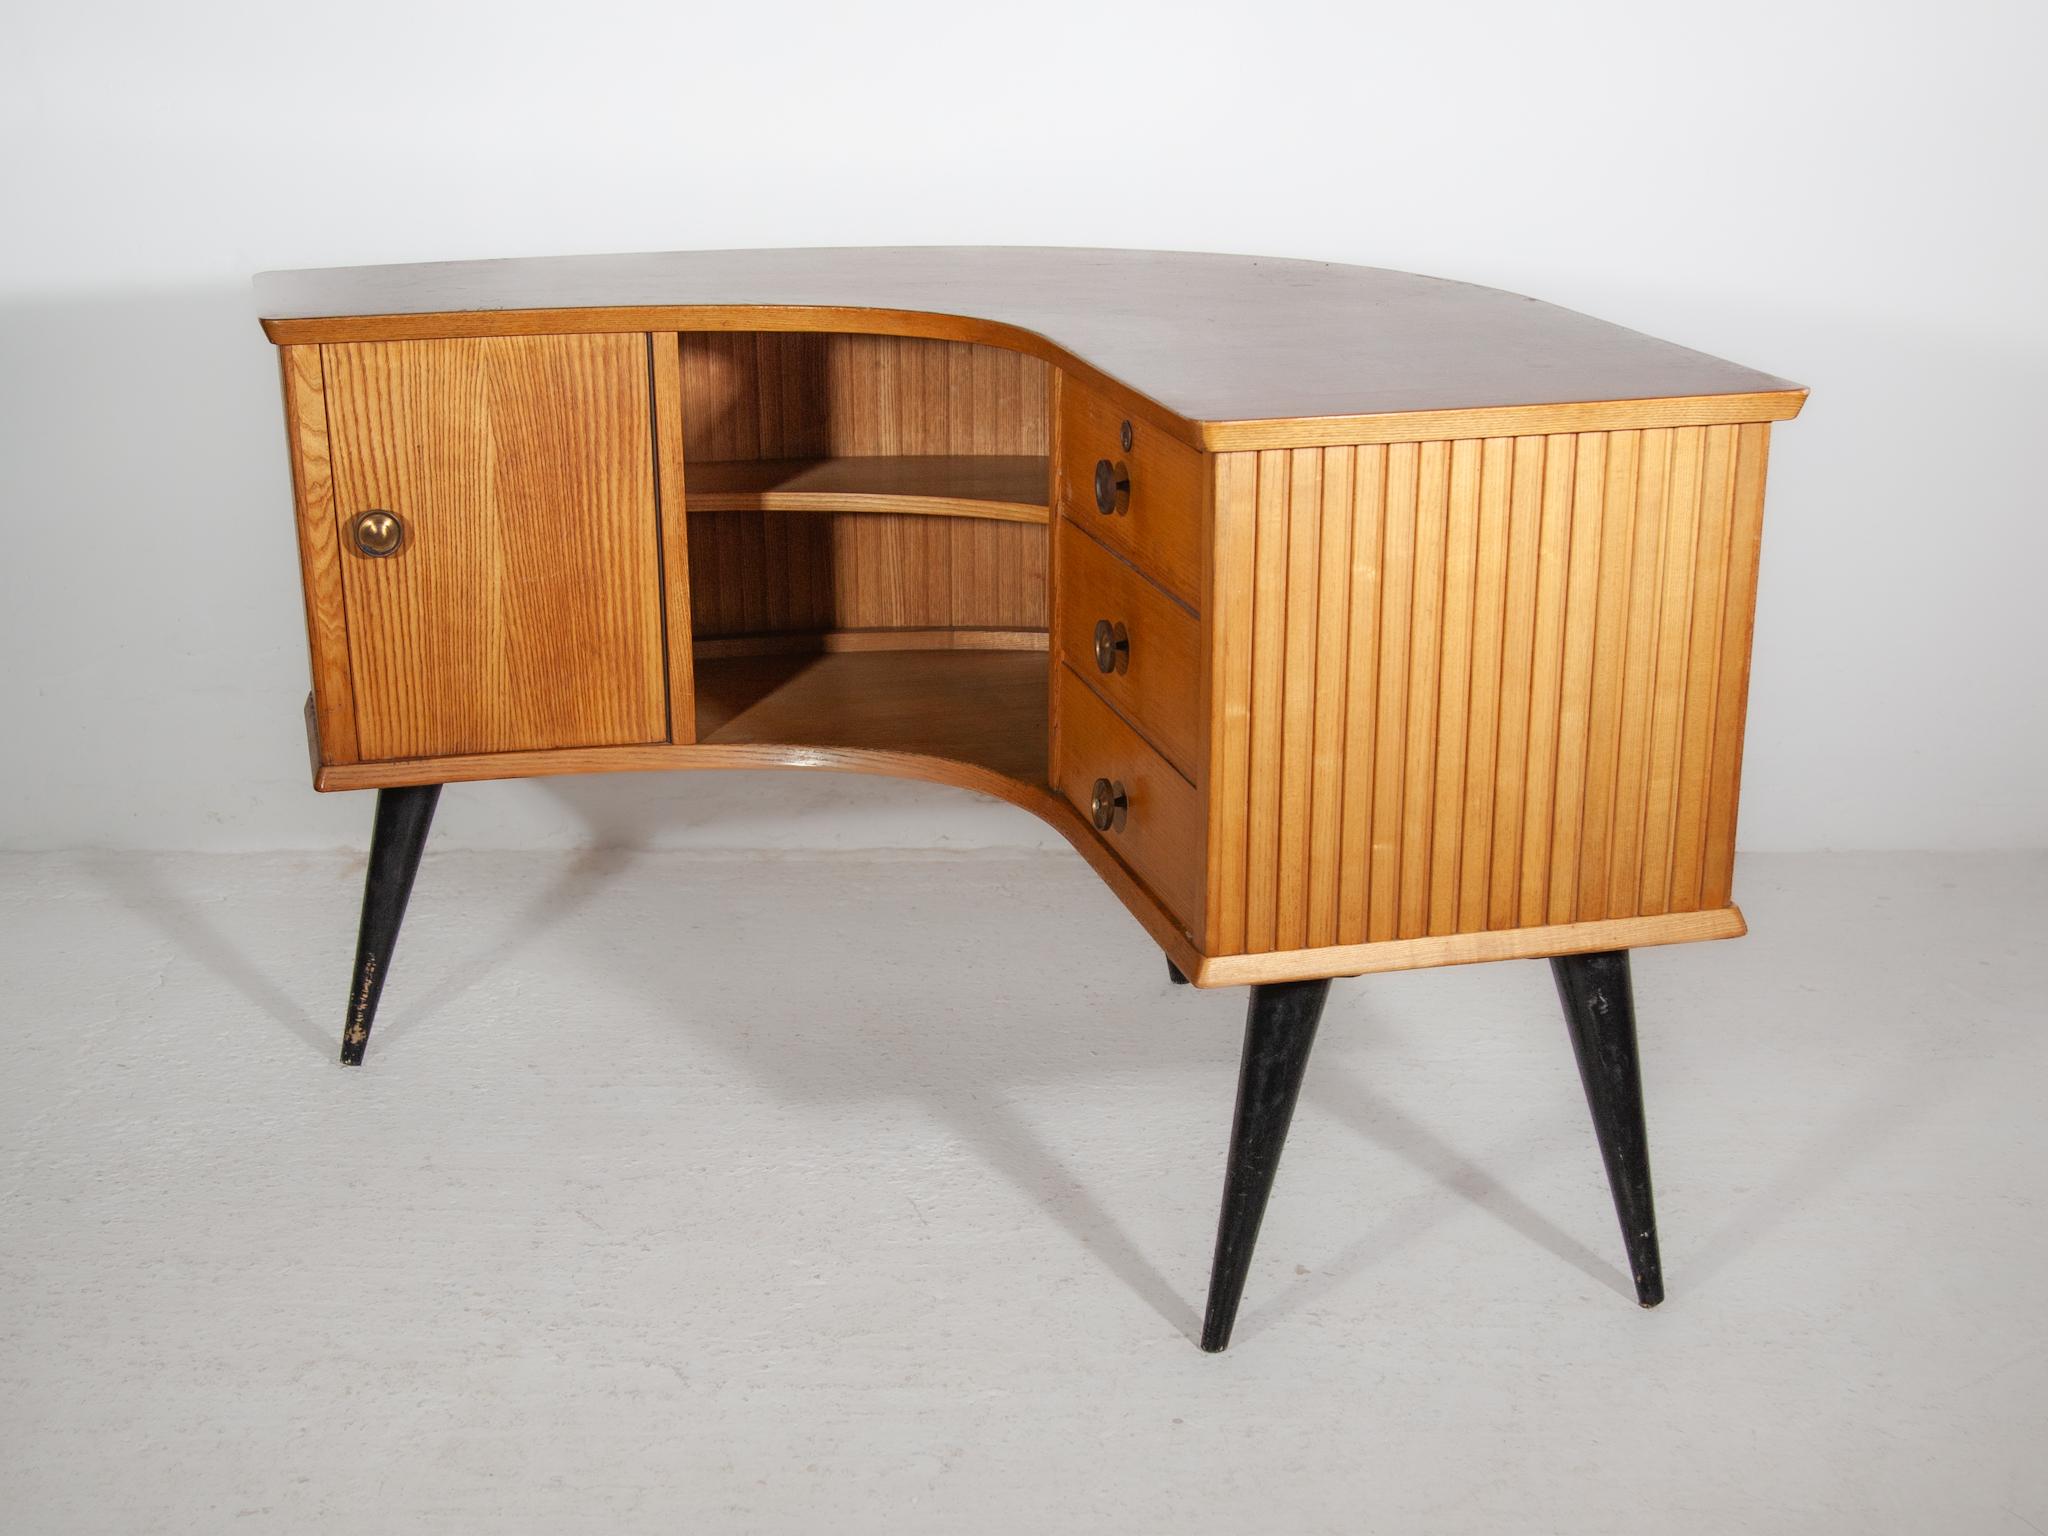 Mid-20th Century Boomerang Shaped Desk, Shop Counter, 1950s by Alfred Hendrickx For Sale